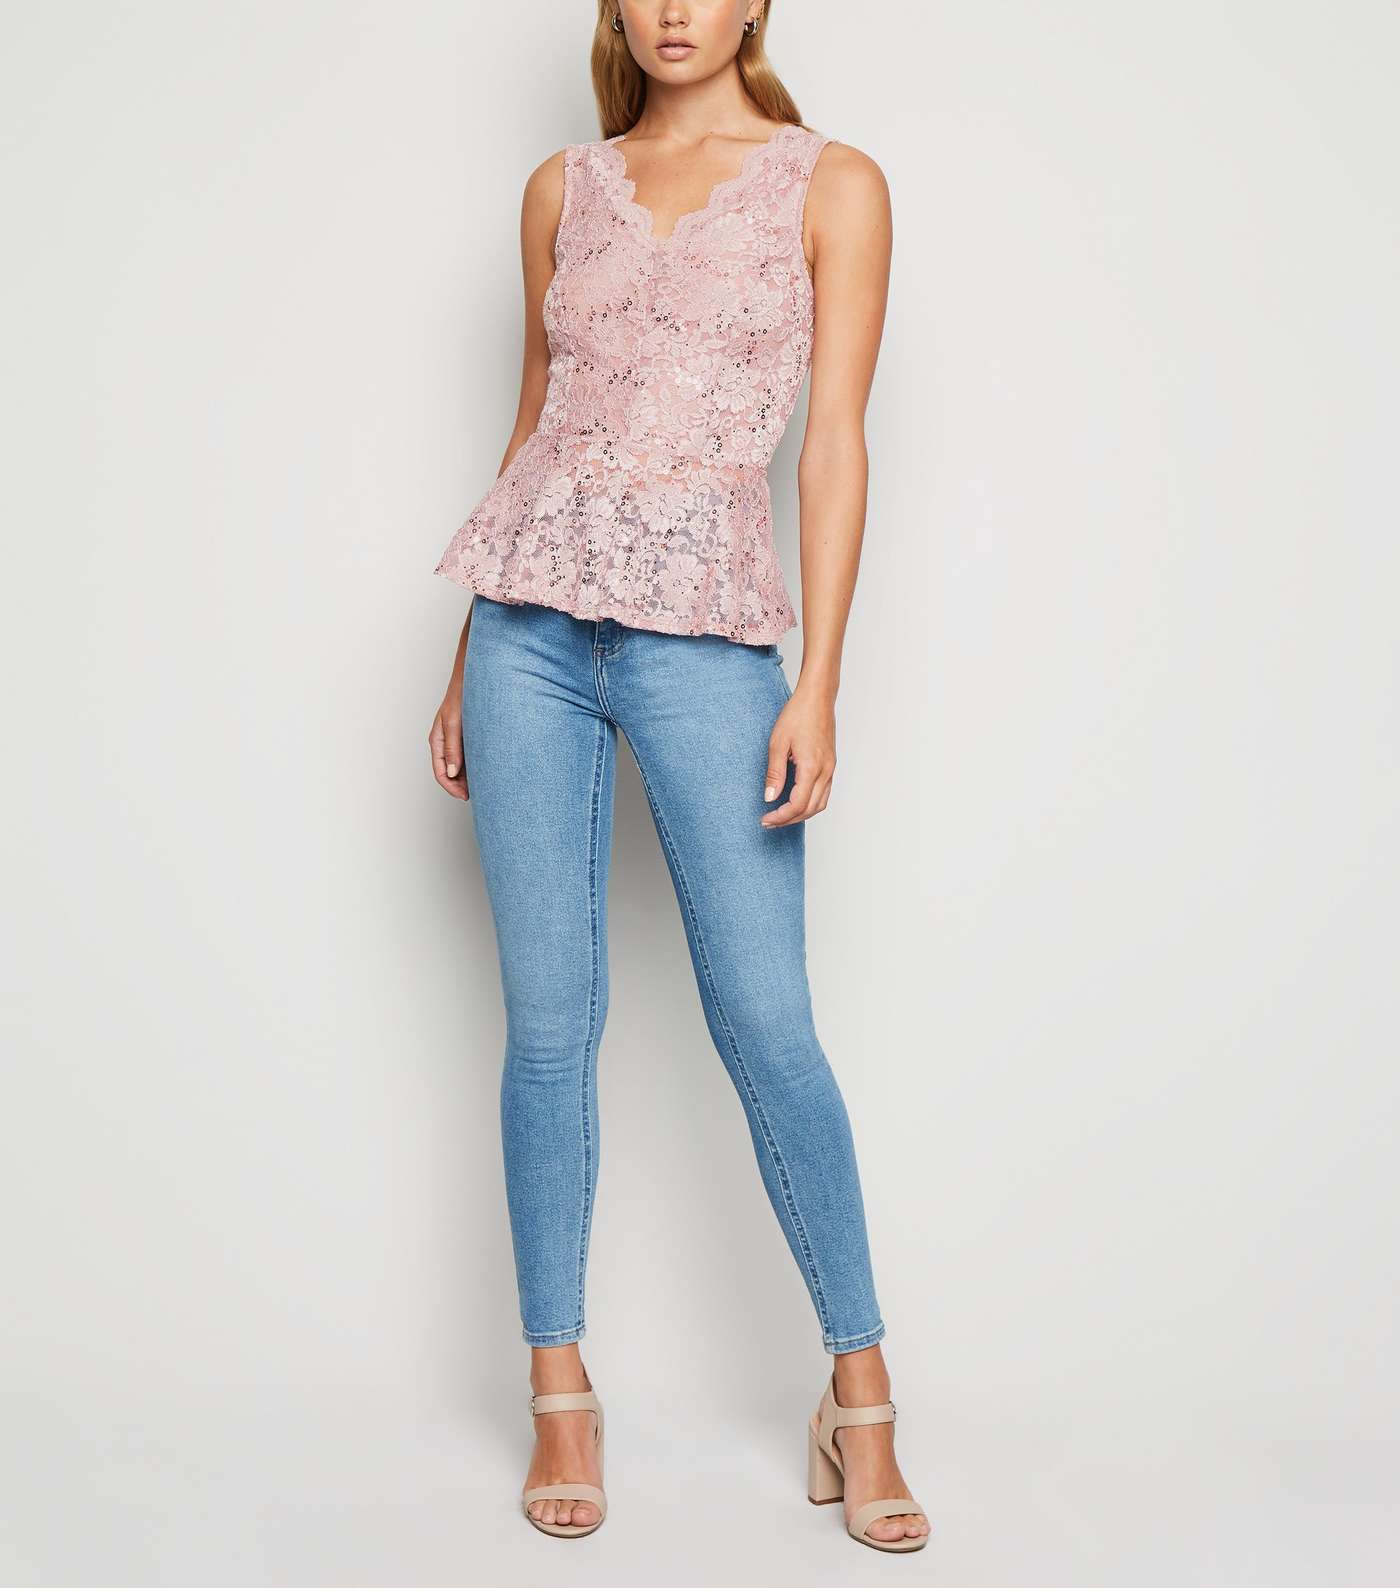 Pale Pink Sequin Lace Peplum Top Image 2